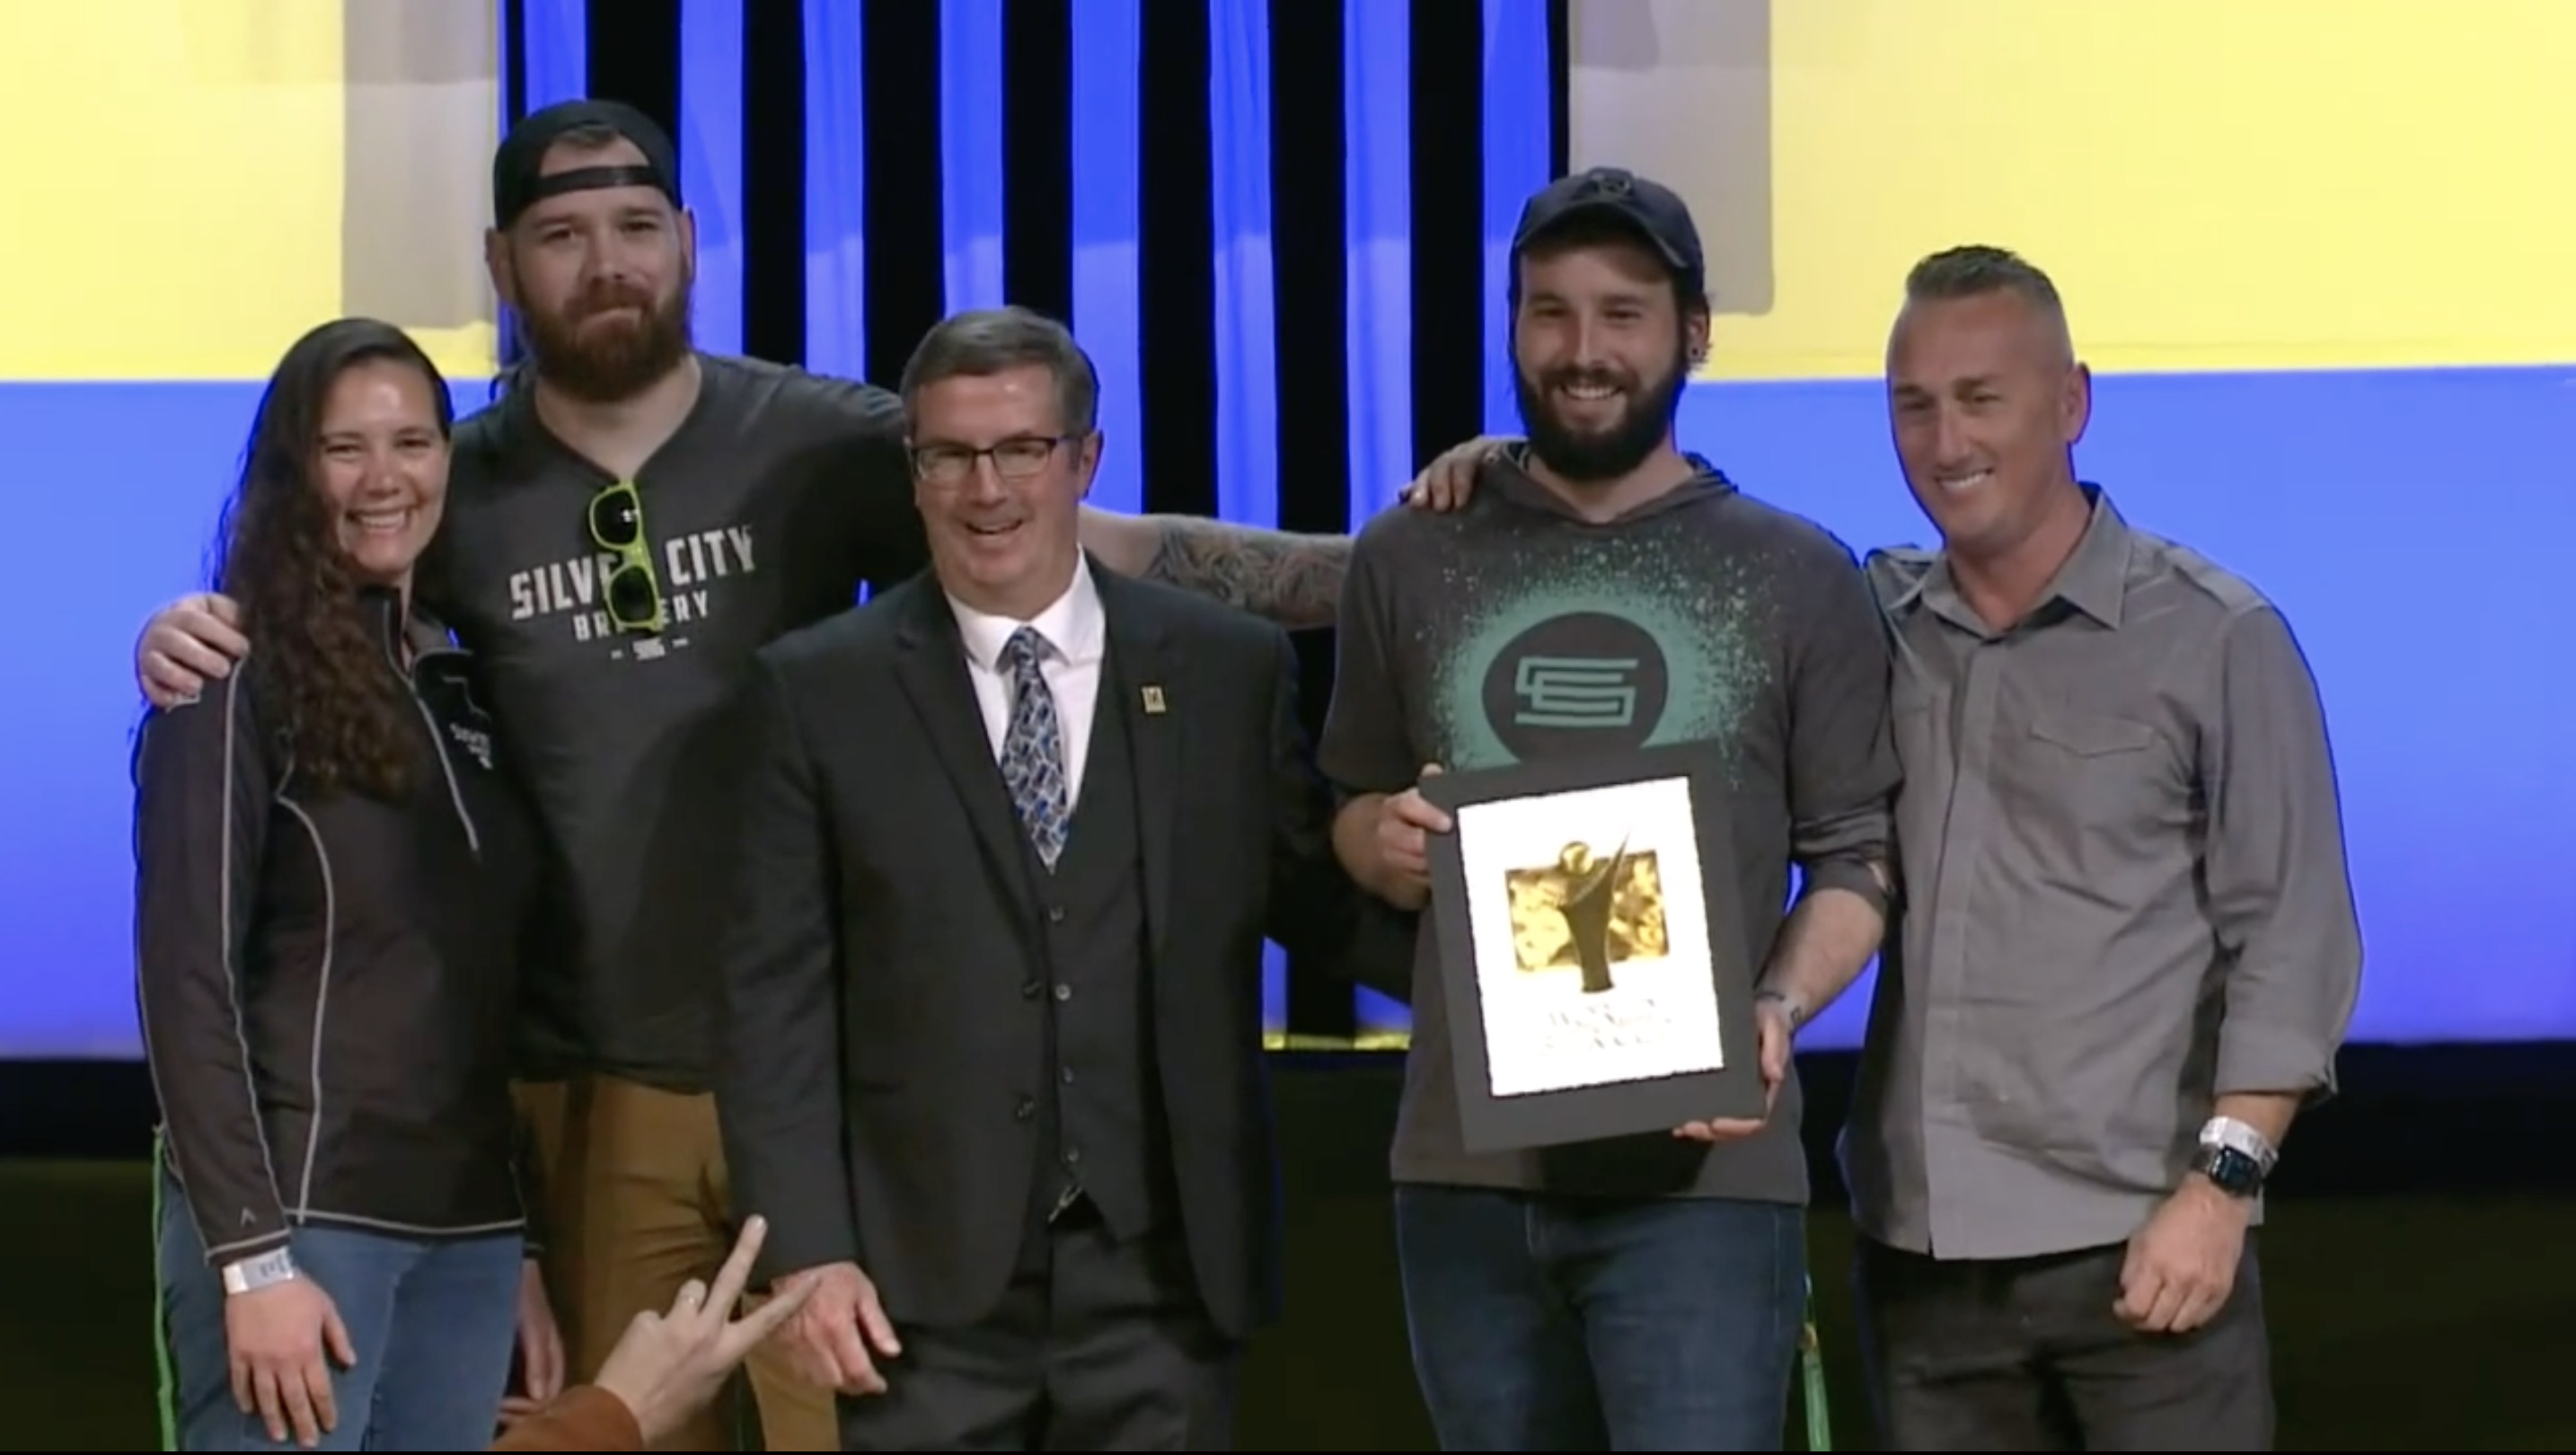 Silver City Brewery accepting their Gold Award at the 2022 World Beer Cup.